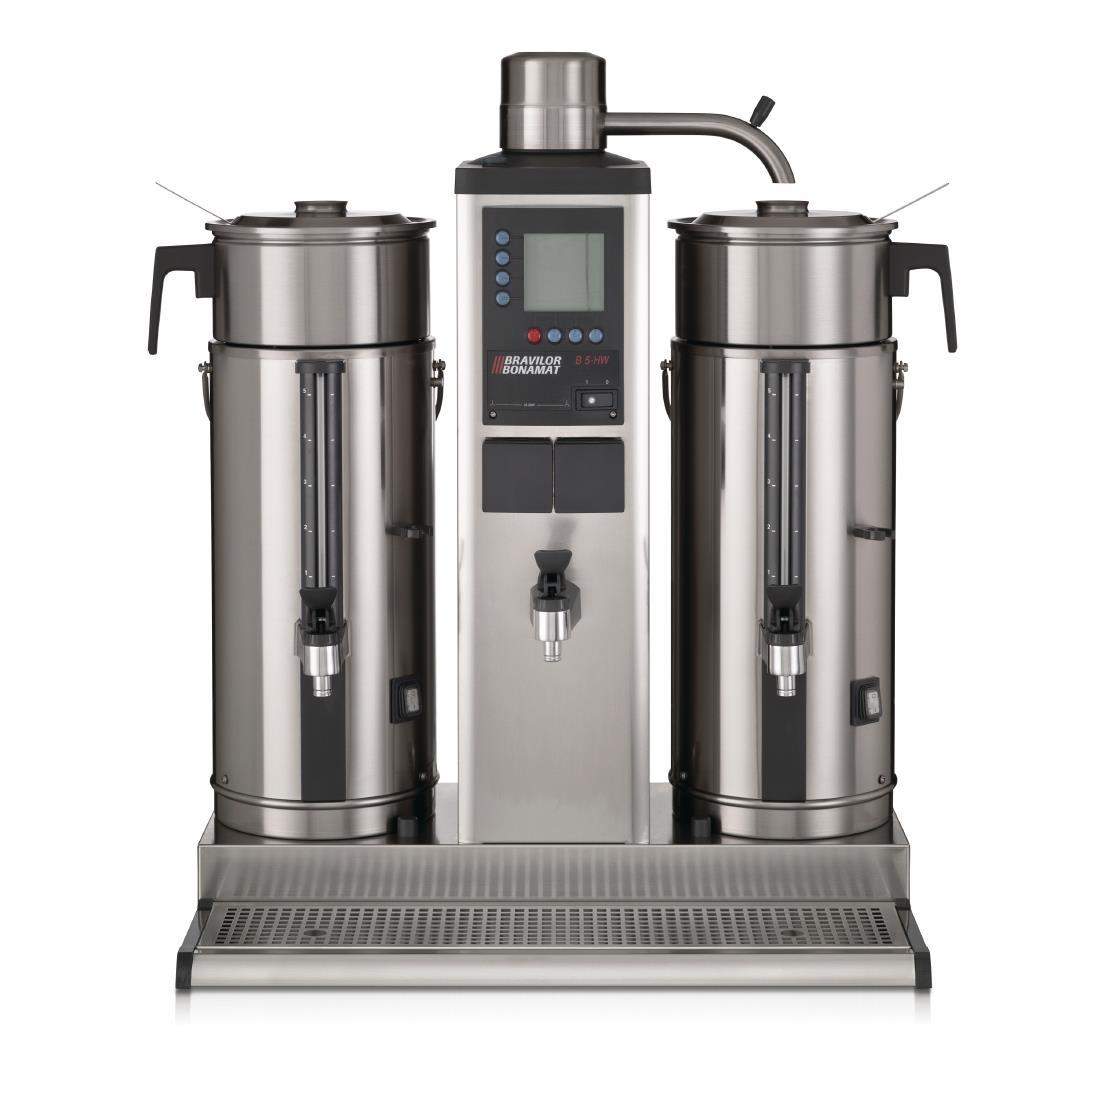 Bravilor B5 HW Bulk Coffee Brewer with 2x5Ltr Coffee Urns and Hot Water Tap Single Phase - DC687-1P  - 2